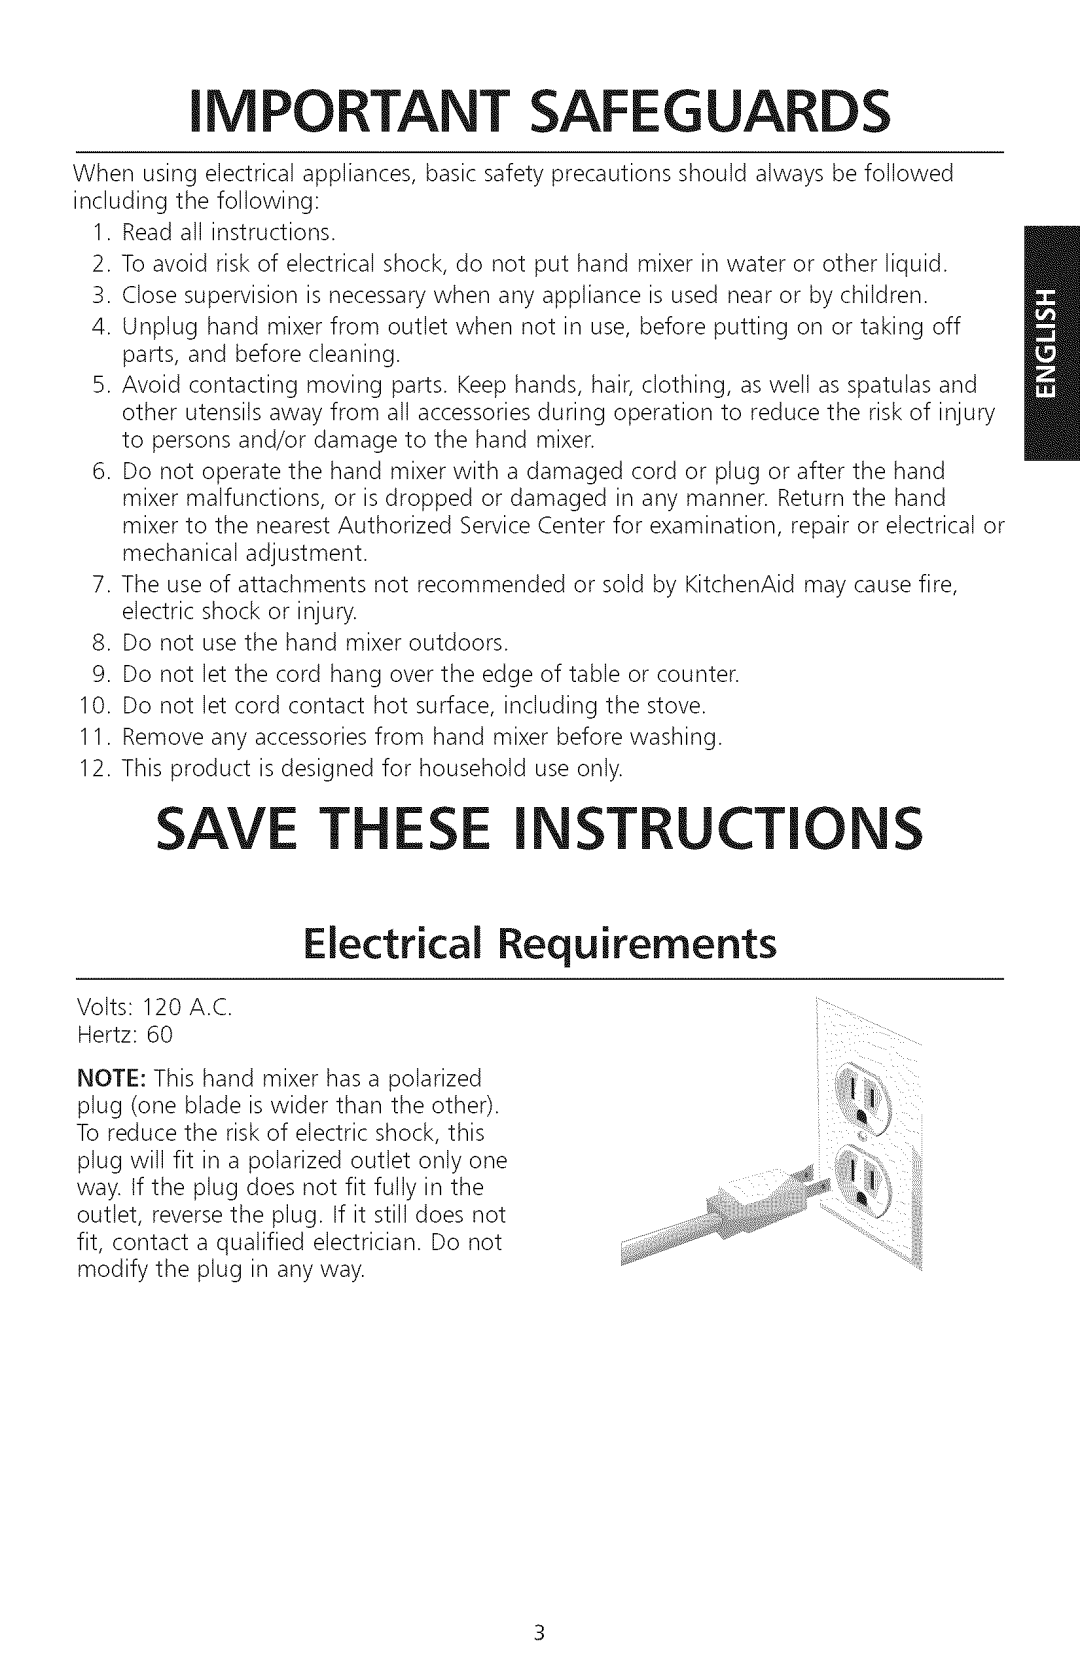 KitchenAid KHM720, KHM920 manual iMPORTANT SAFEGUARDS, Save These Instructions, Electrical Requirements 